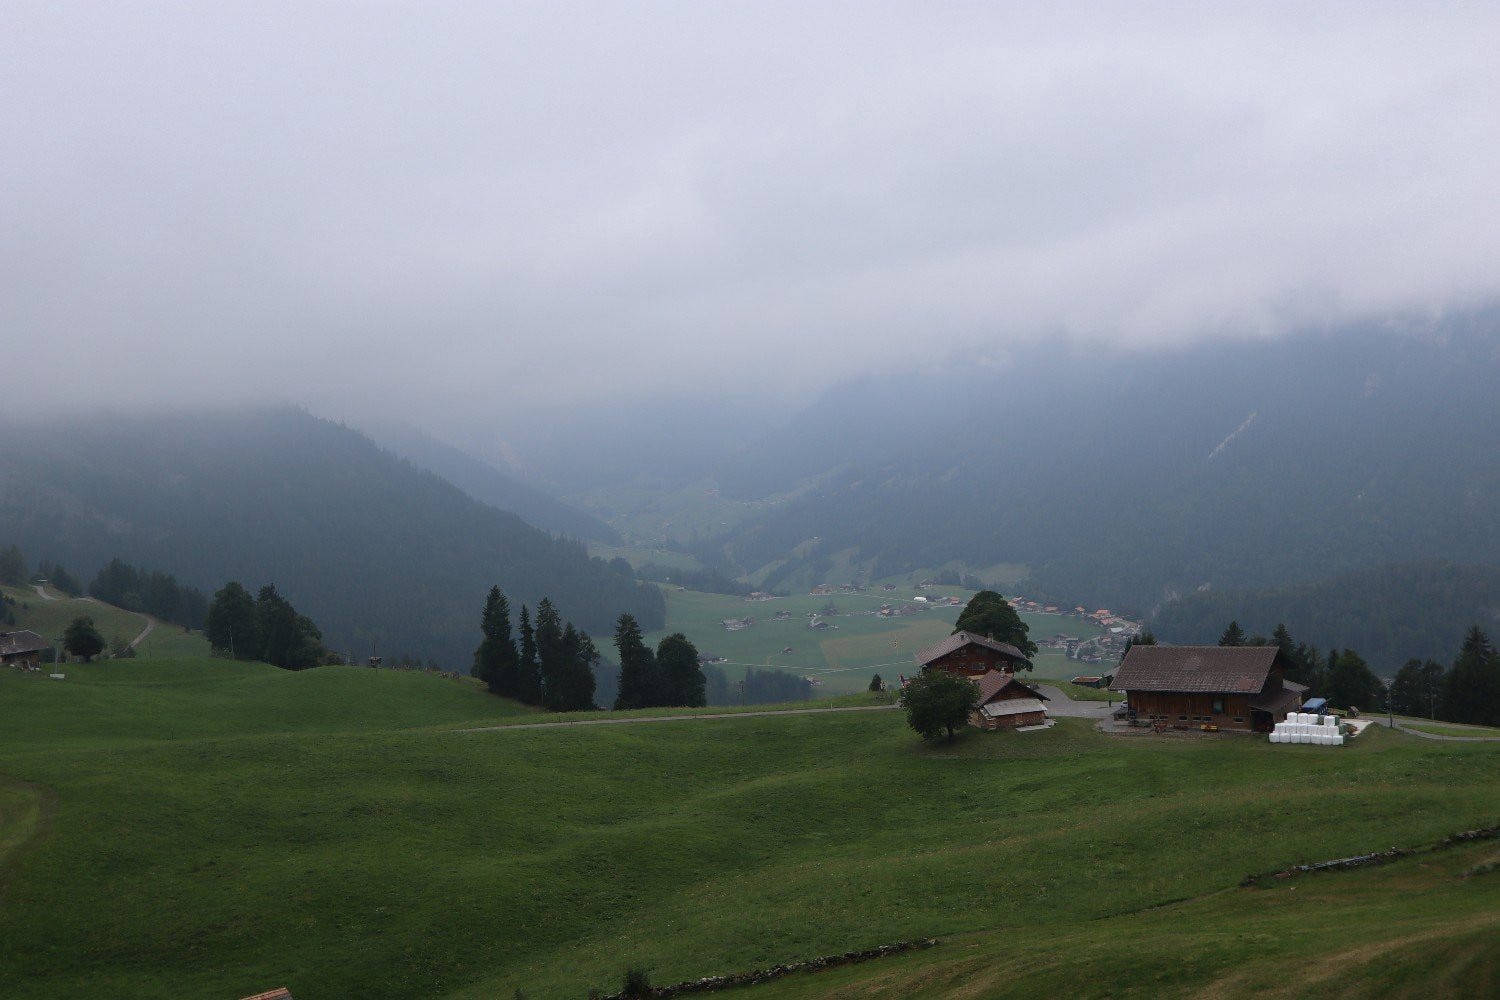 A grassy valley in Switzerland with chalets dotted on the hillsides, covered in mist